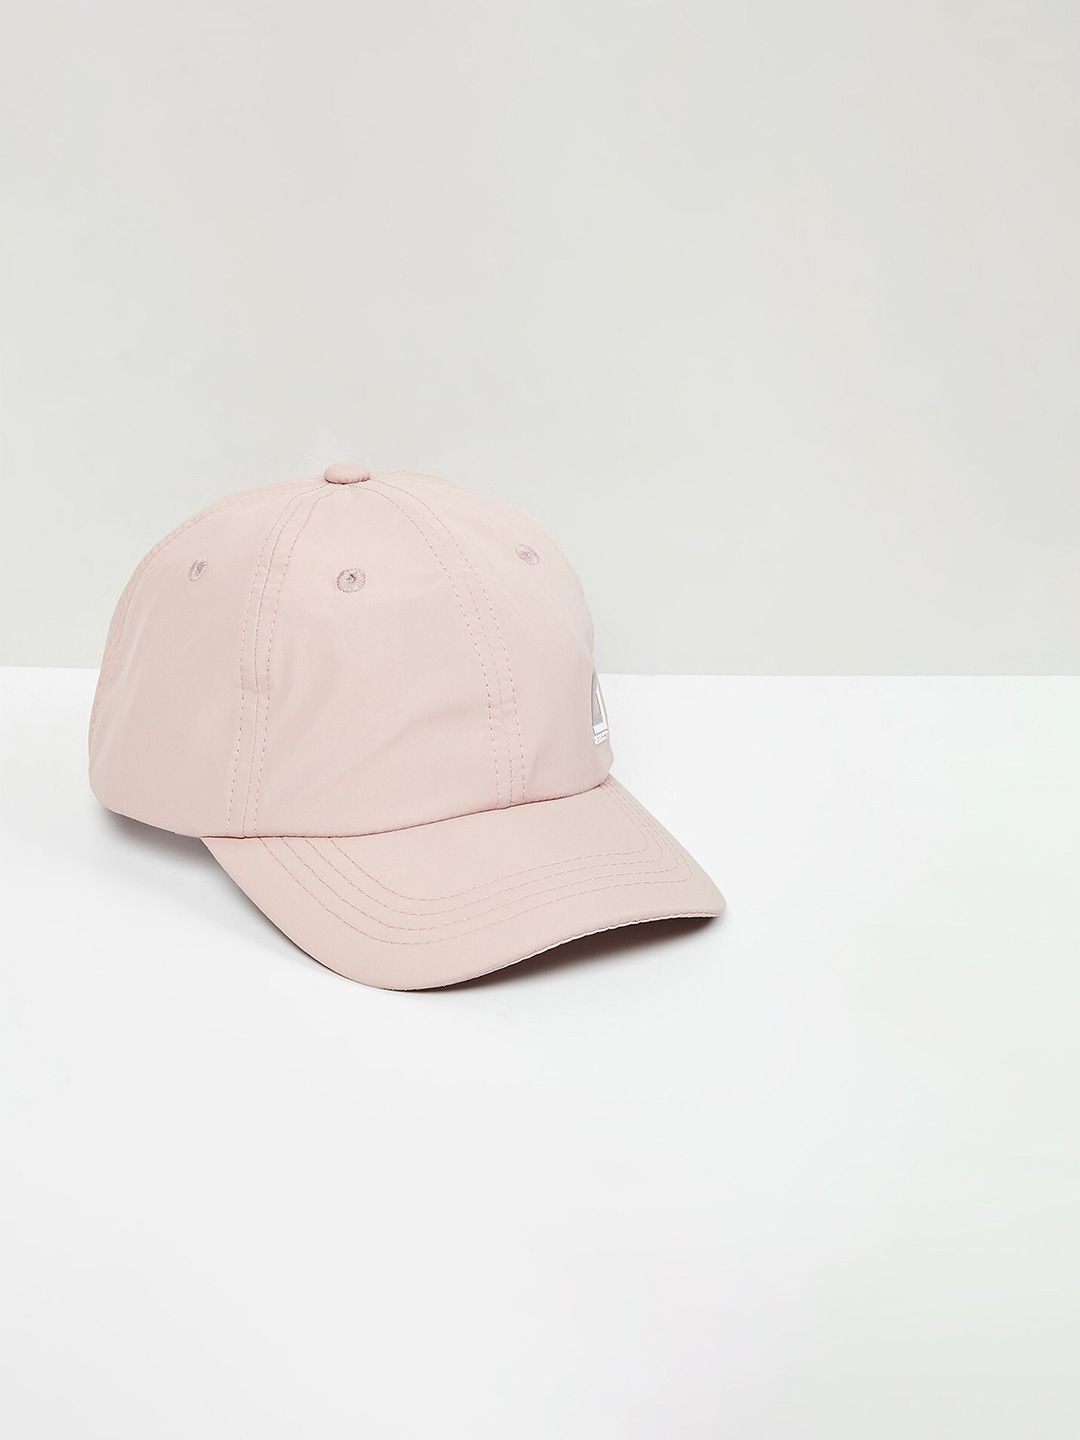 max Women Nude-Coloured Solid Baseball Cap Price in India